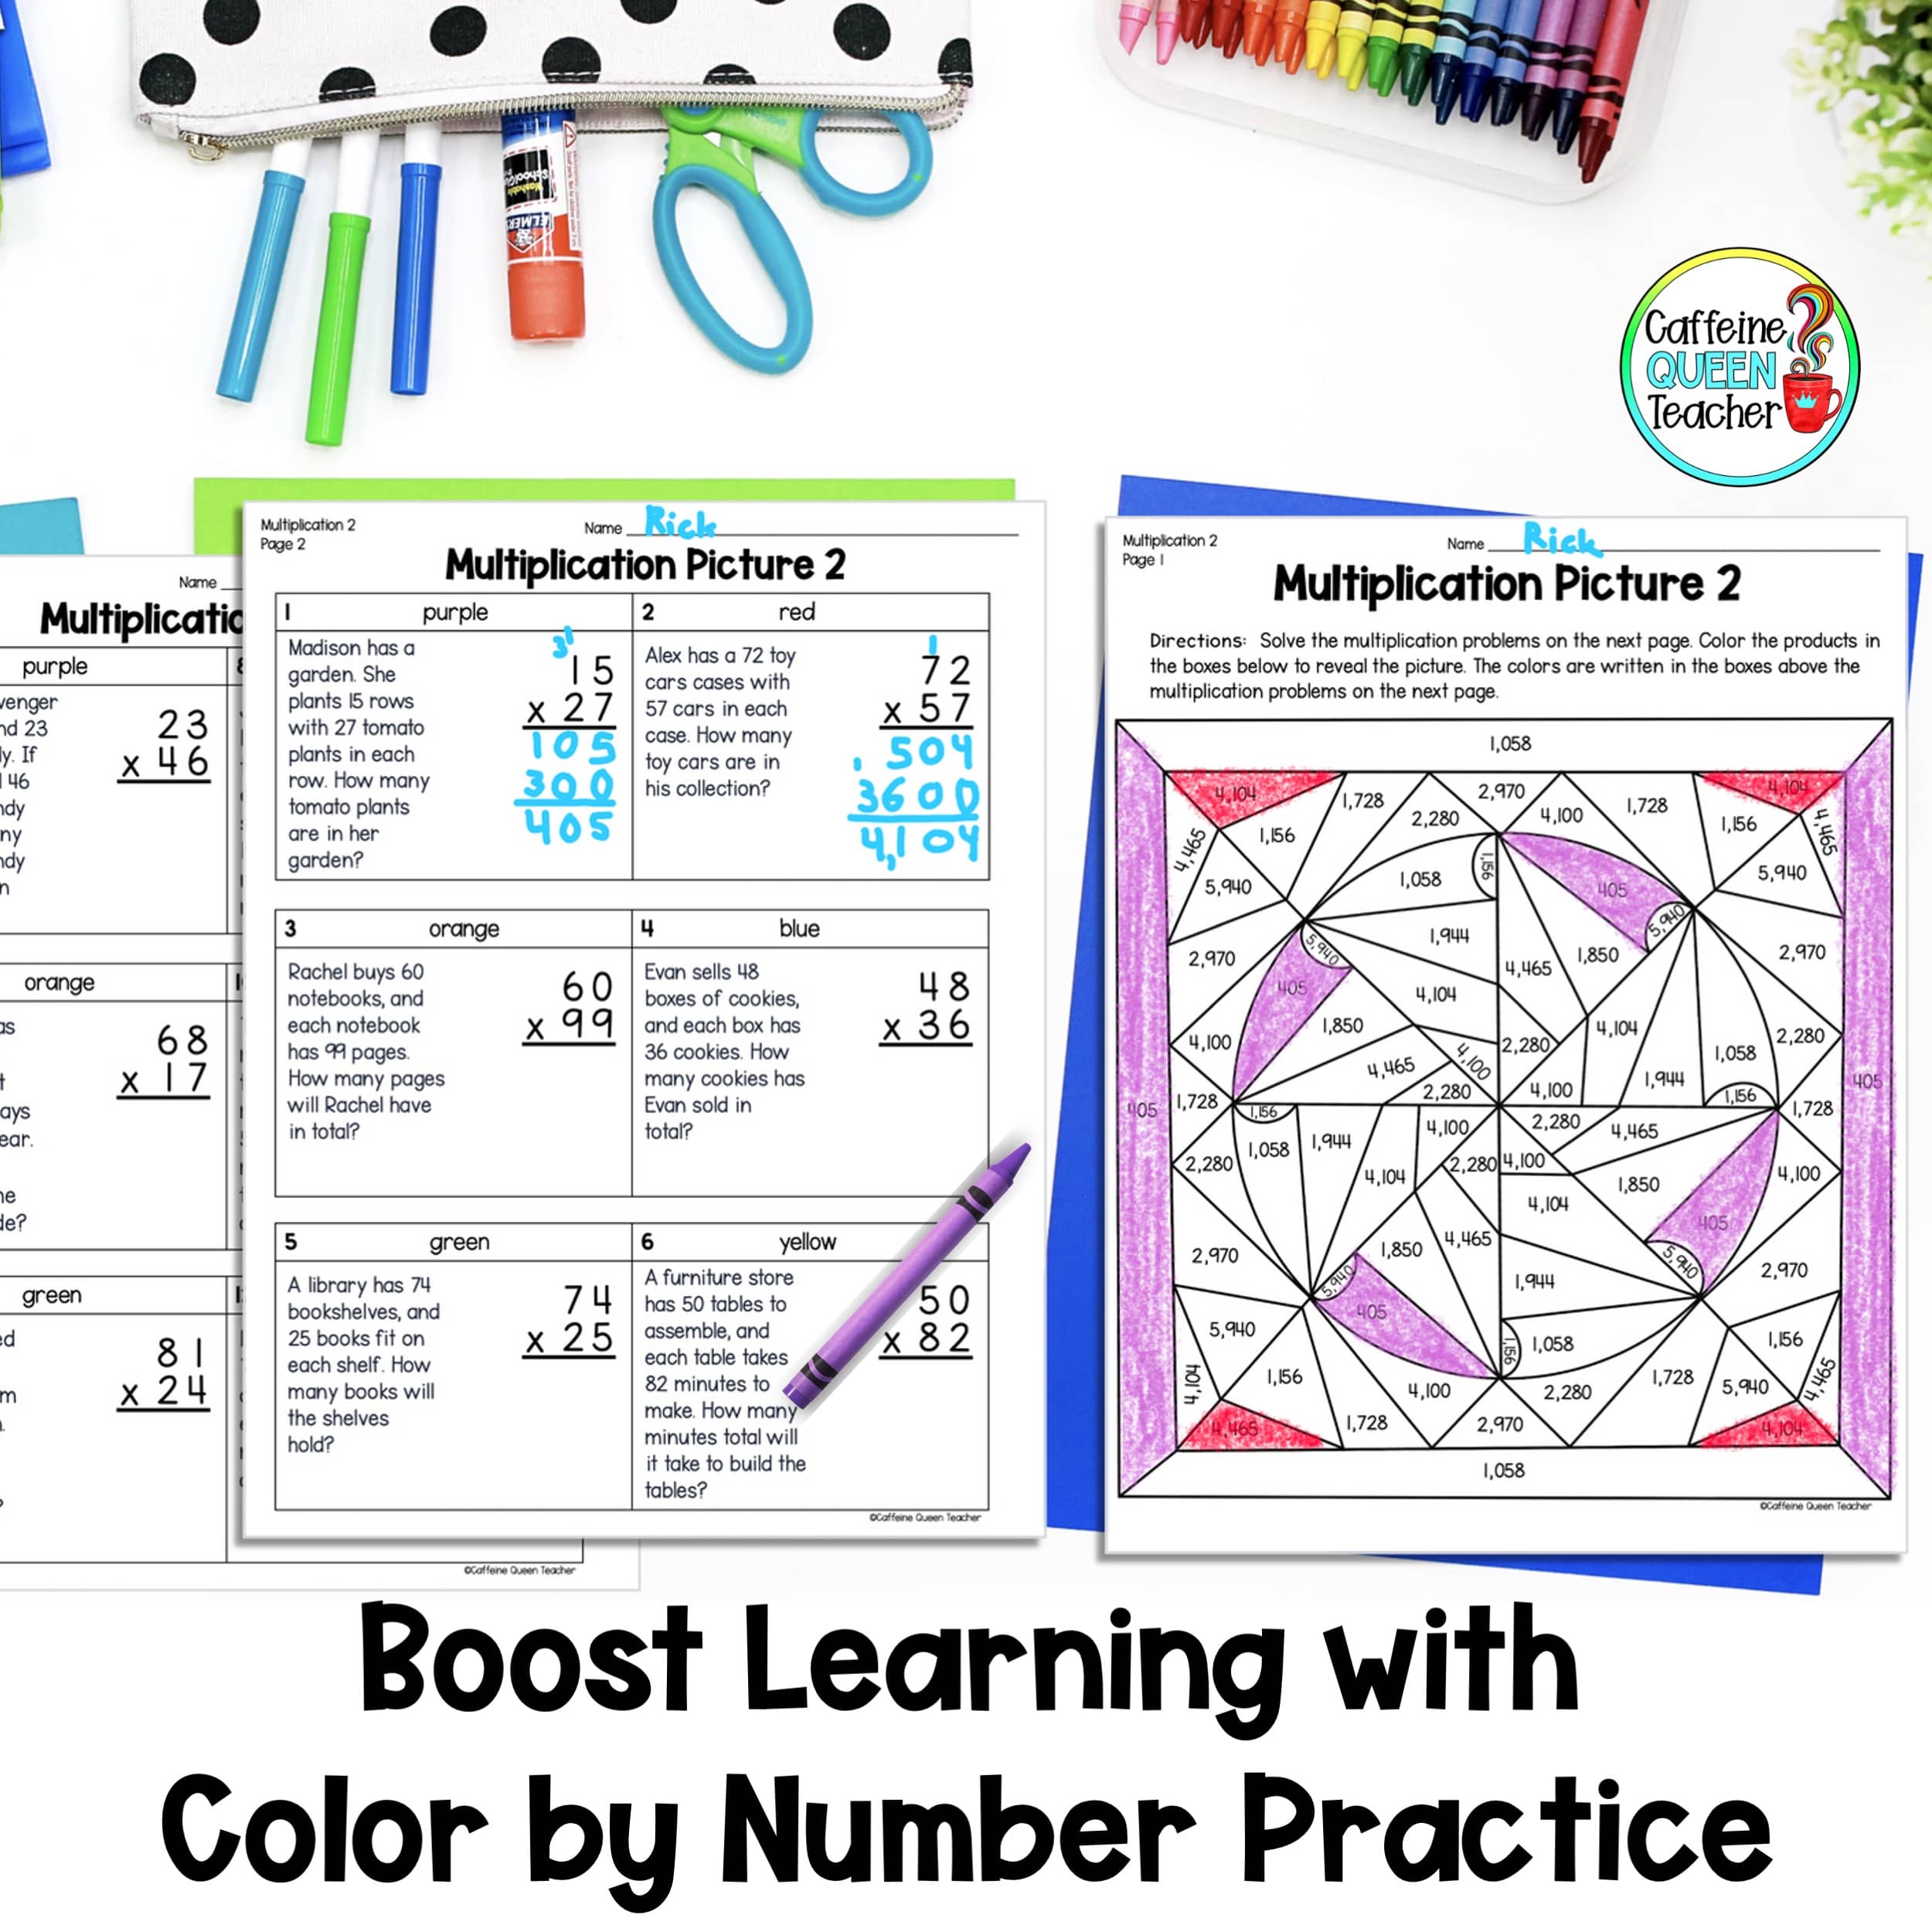 Engage students with color-by-code practice pages